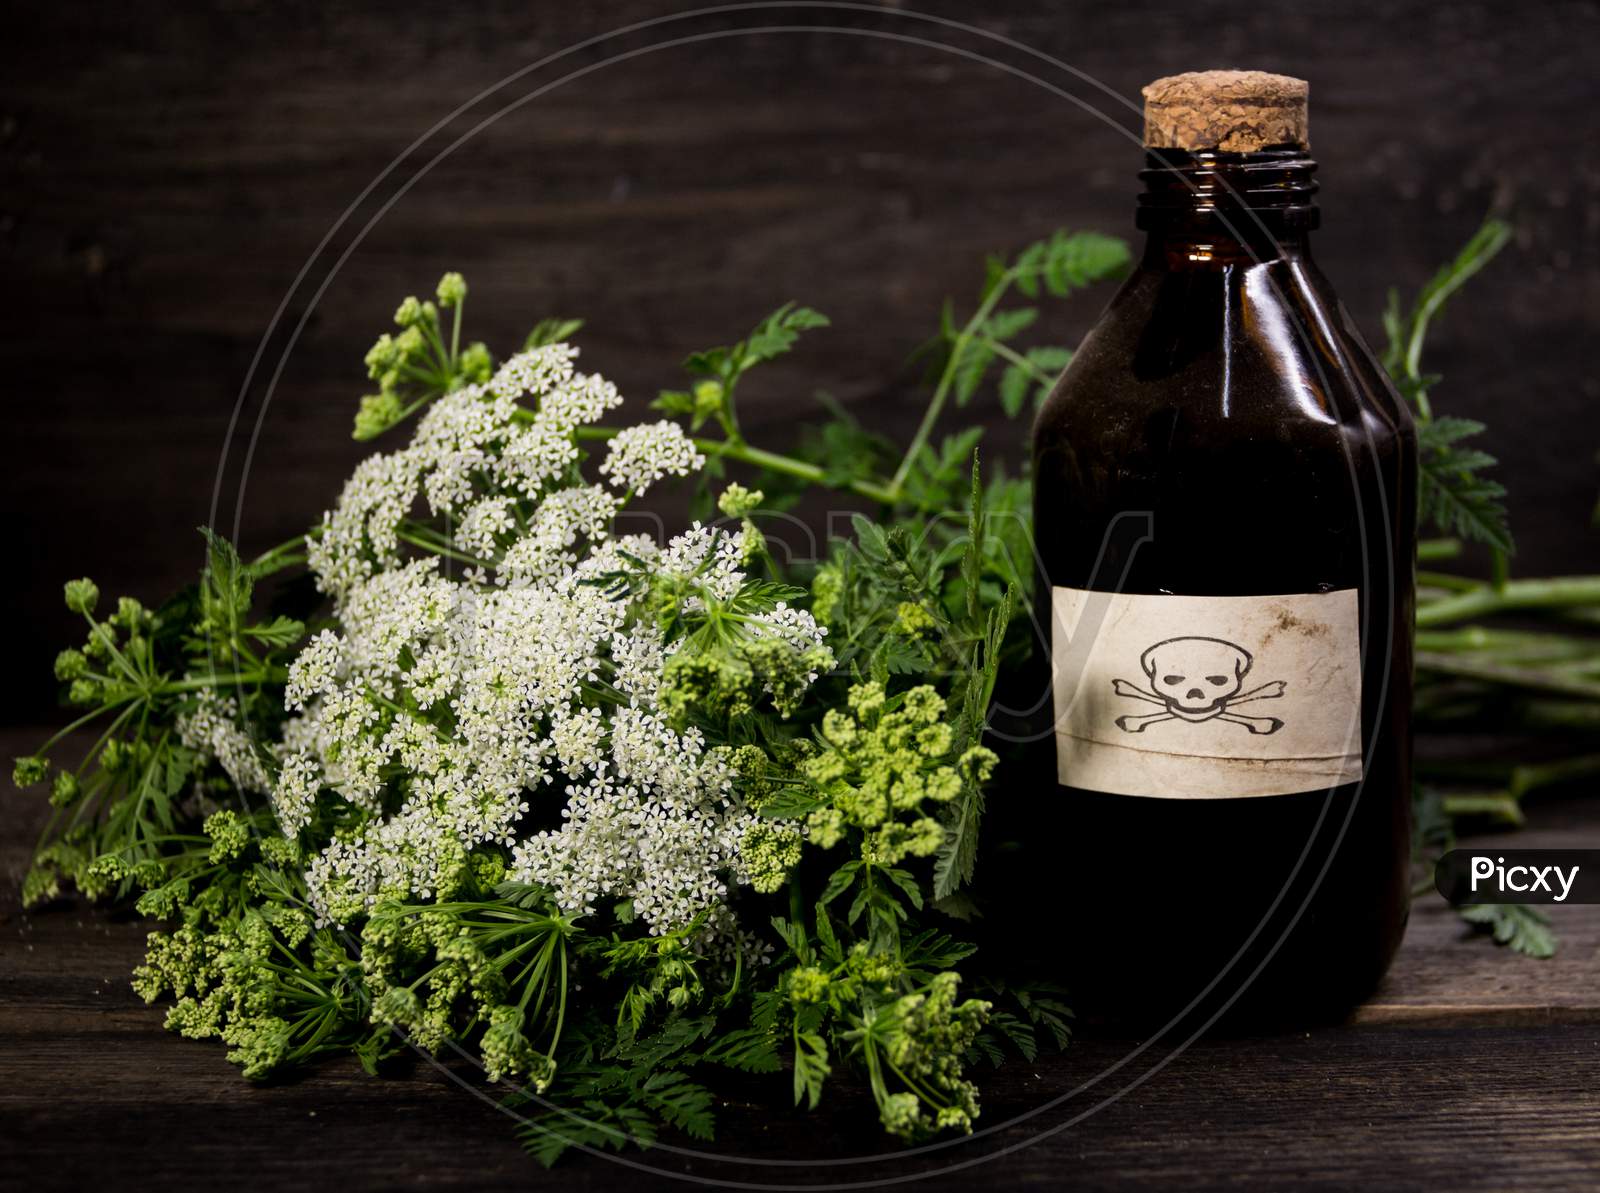 Hemlock Flower Bouquet With A Vial Of Poison